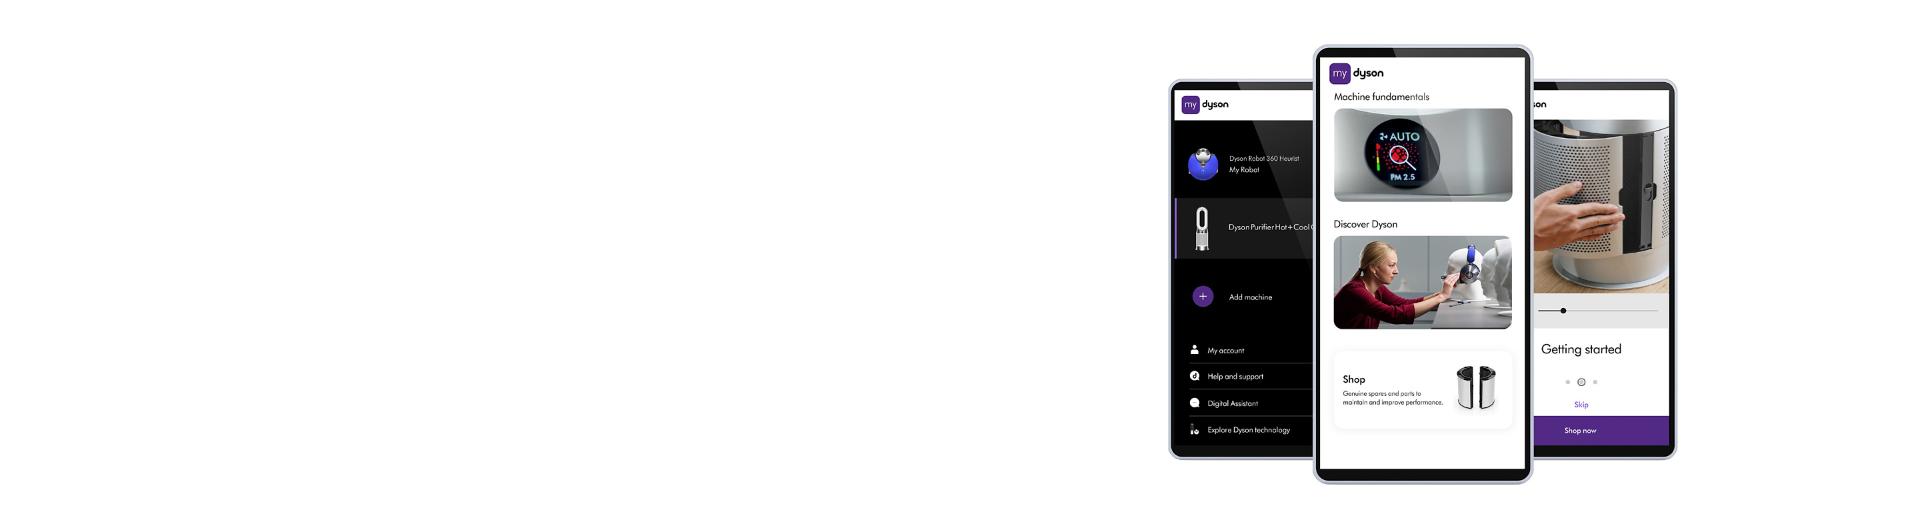 The different features of the MyDyson app shown on phone screens.